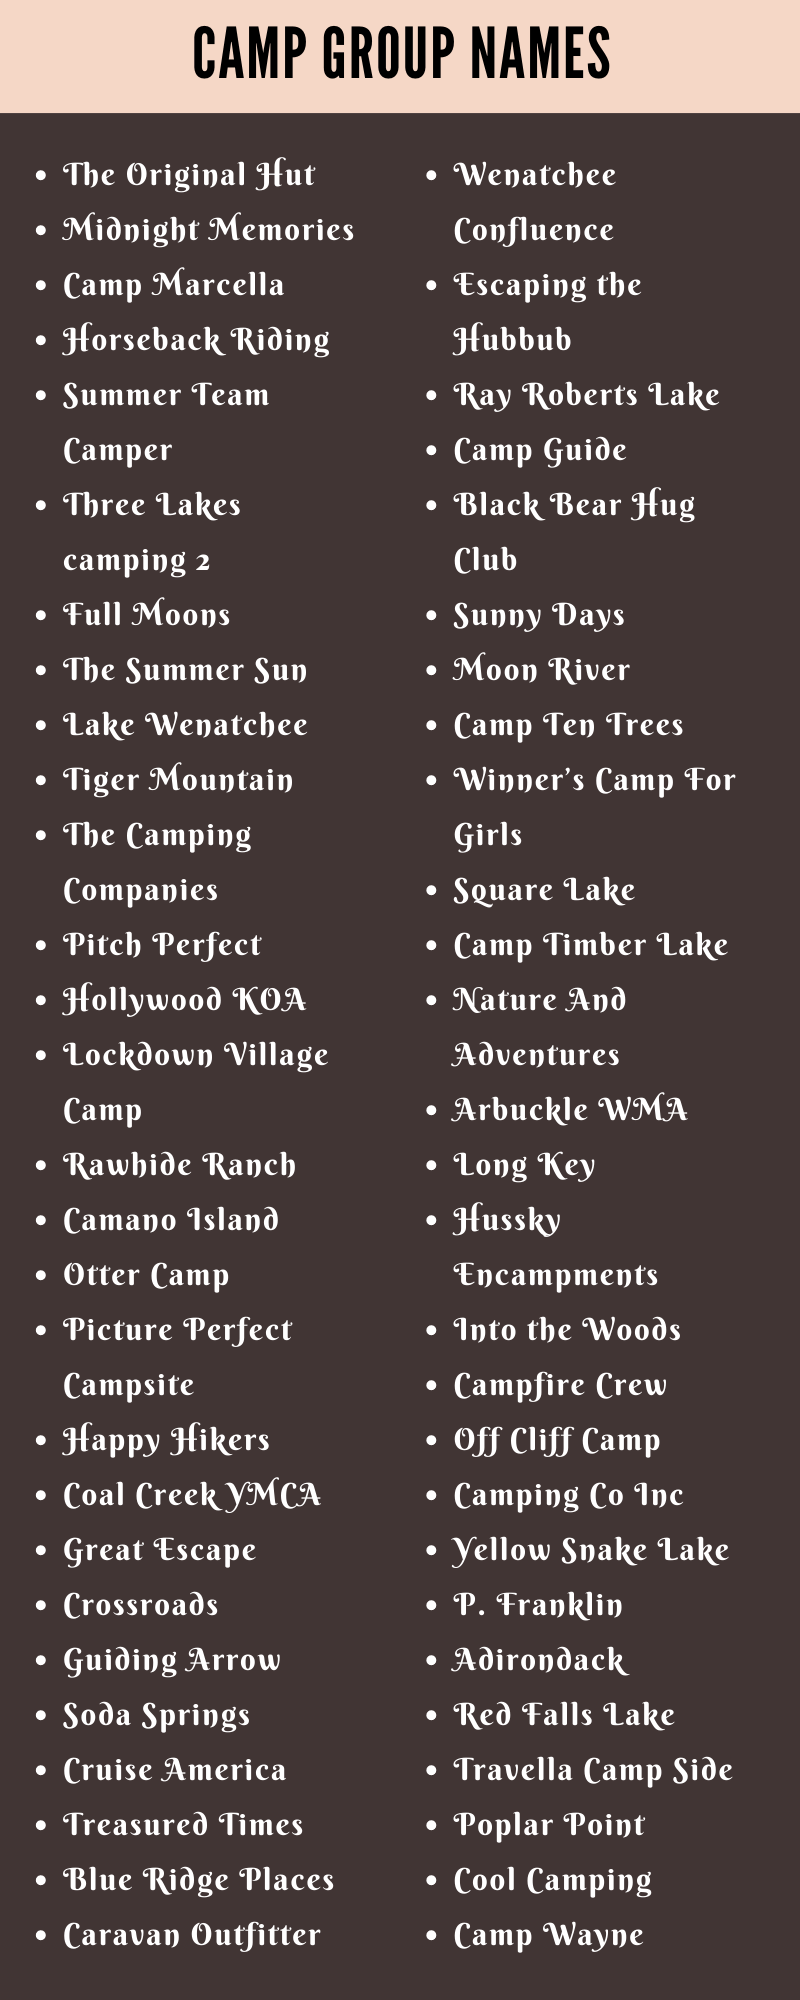 400 Cool Camp Group Names Ideas and Suggestions